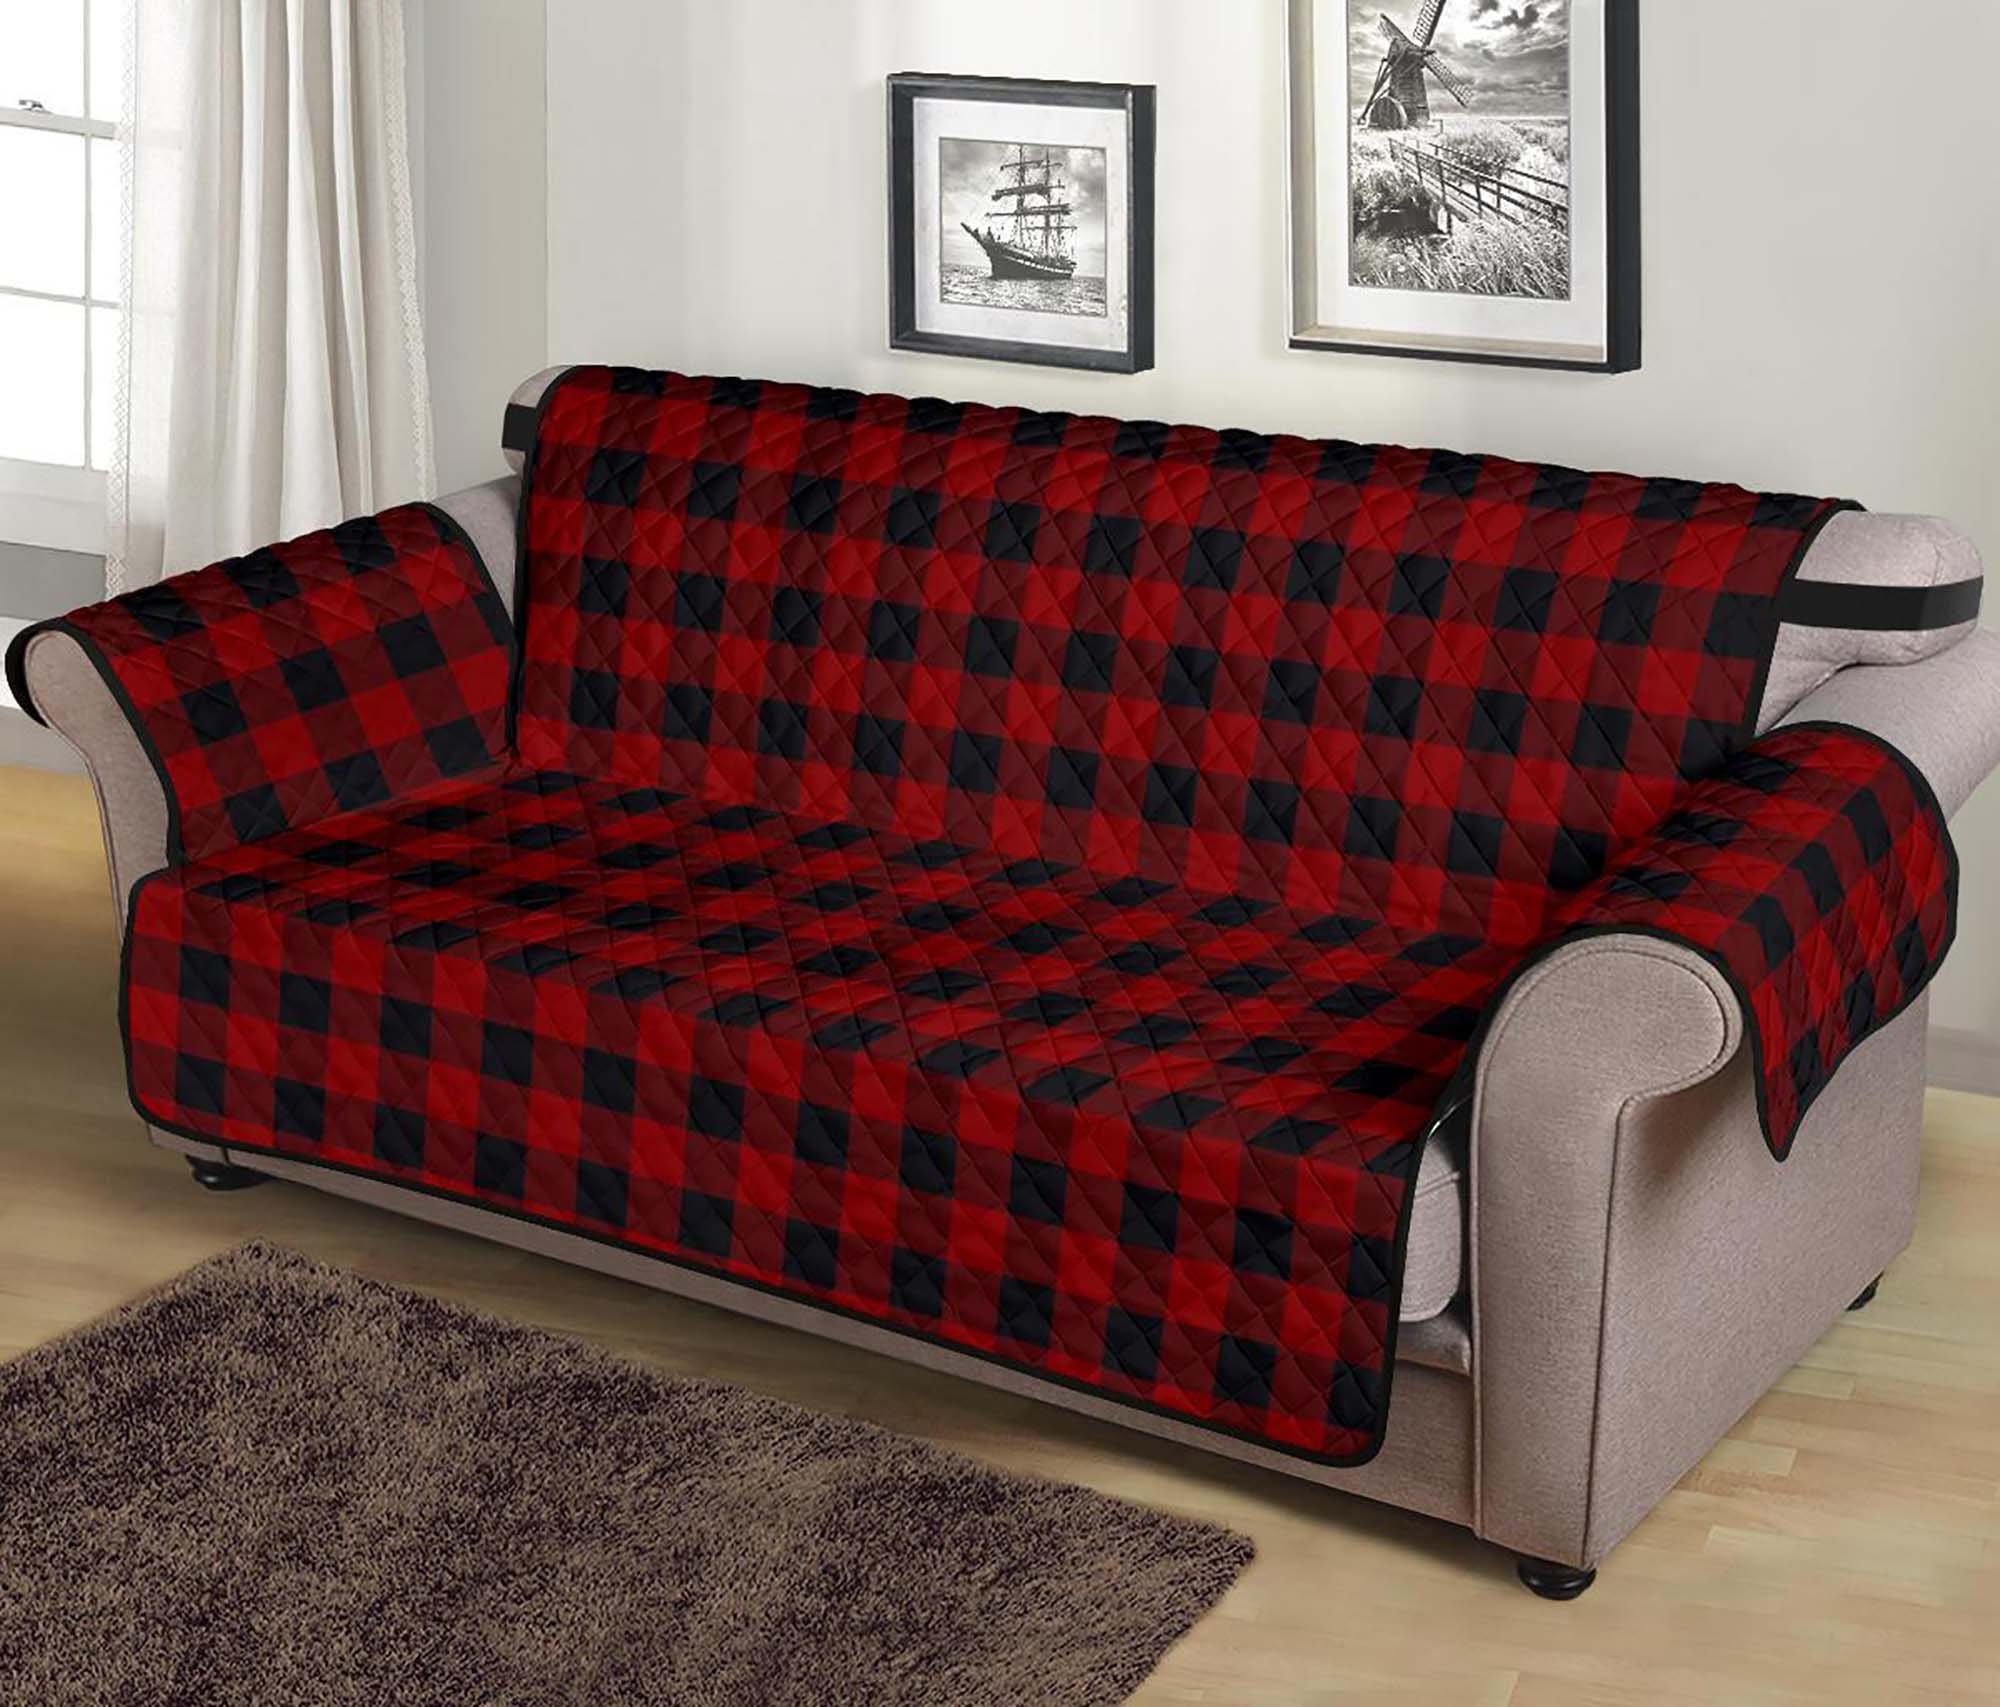 Black and White Buffalo Plaid 70 Seat Width Sofa Couch Cover